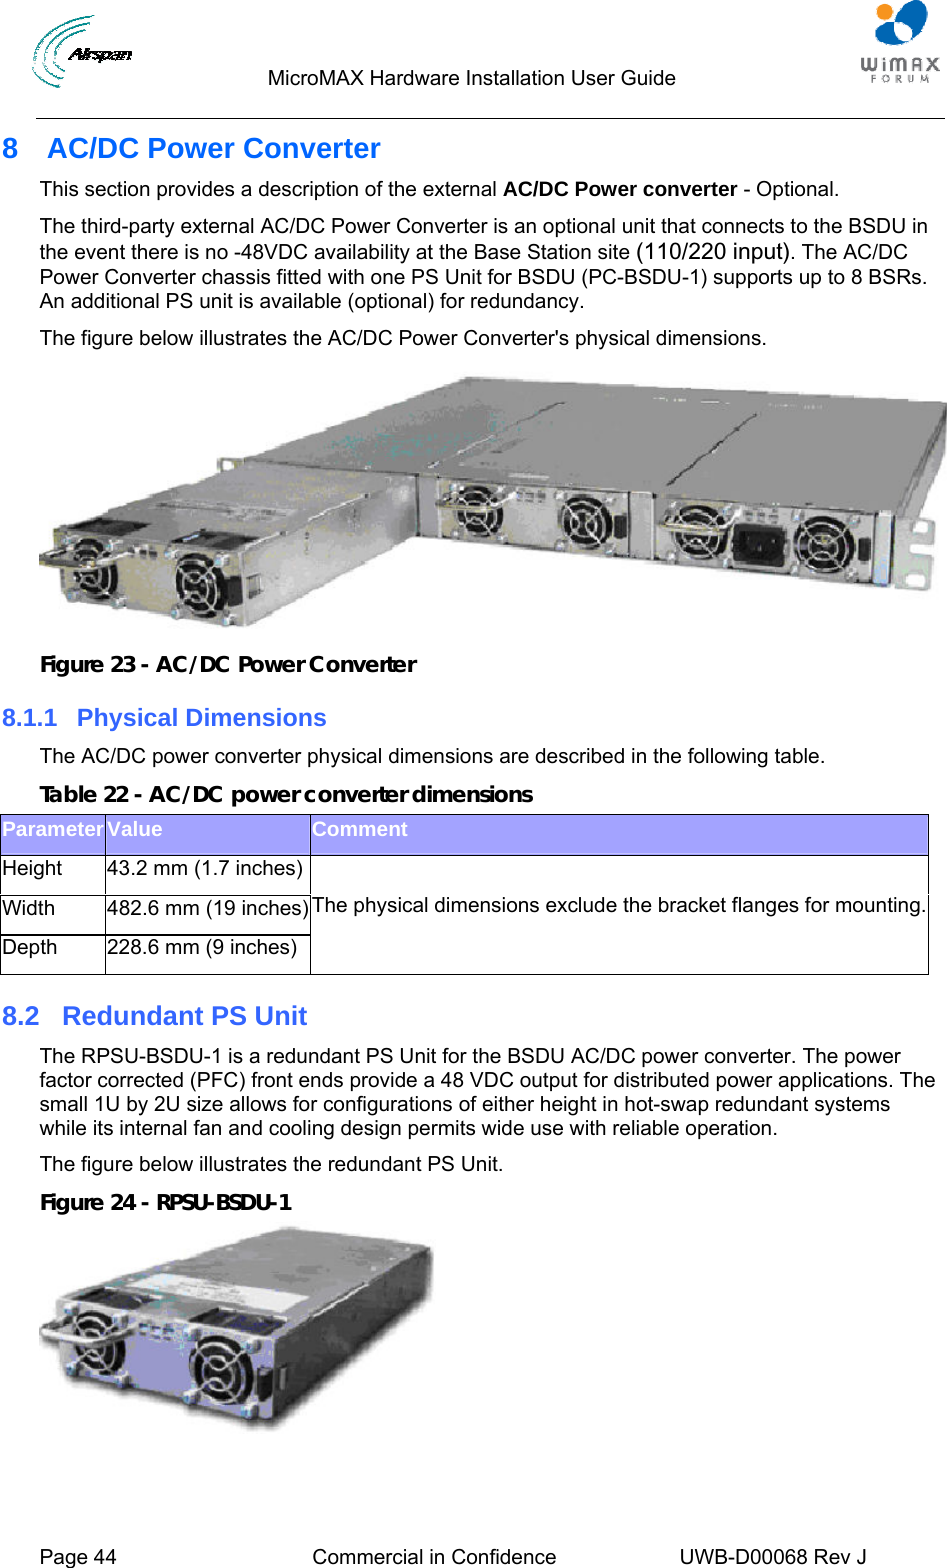                                  MicroMAX Hardware Installation User Guide     Page 44  Commercial in Confidence  UWB-D00068 Rev J   8  AC/DC Power Converter This section provides a description of the external AC/DC Power converter - Optional. The third-party external AC/DC Power Converter is an optional unit that connects to the BSDU in the event there is no -48VDC availability at the Base Station site (110/220 input). The AC/DC Power Converter chassis fitted with one PS Unit for BSDU (PC-BSDU-1) supports up to 8 BSRs. An additional PS unit is available (optional) for redundancy. The figure below illustrates the AC/DC Power Converter&apos;s physical dimensions.  Figure 23 - AC/DC Power Converter 8.1.1 Physical Dimensions The AC/DC power converter physical dimensions are described in the following table. Table 22 - AC/DC power converter dimensions Parameter Value  Comment Height  43.2 mm (1.7 inches) Width  482.6 mm (19 inches) Depth  228.6 mm (9 inches)  The physical dimensions exclude the bracket flanges for mounting.8.2  Redundant PS Unit The RPSU-BSDU-1 is a redundant PS Unit for the BSDU AC/DC power converter. The power factor corrected (PFC) front ends provide a 48 VDC output for distributed power applications. The small 1U by 2U size allows for configurations of either height in hot-swap redundant systems while its internal fan and cooling design permits wide use with reliable operation. The figure below illustrates the redundant PS Unit. Figure 24 - RPSU-BSDU-1  